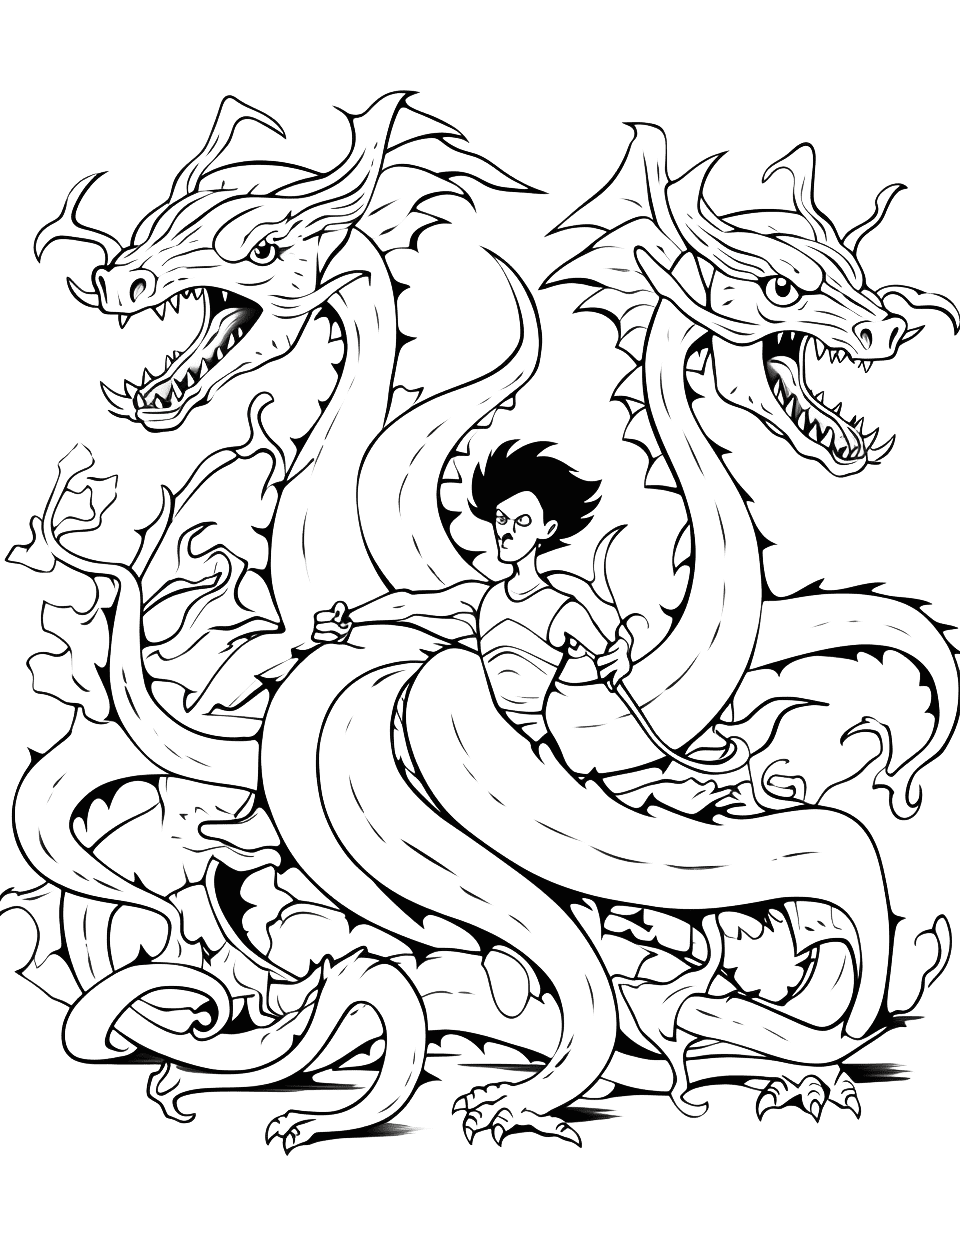 Hydra Battle Dragon Coloring Page - A brave hero battling a multi-headed Hydra.